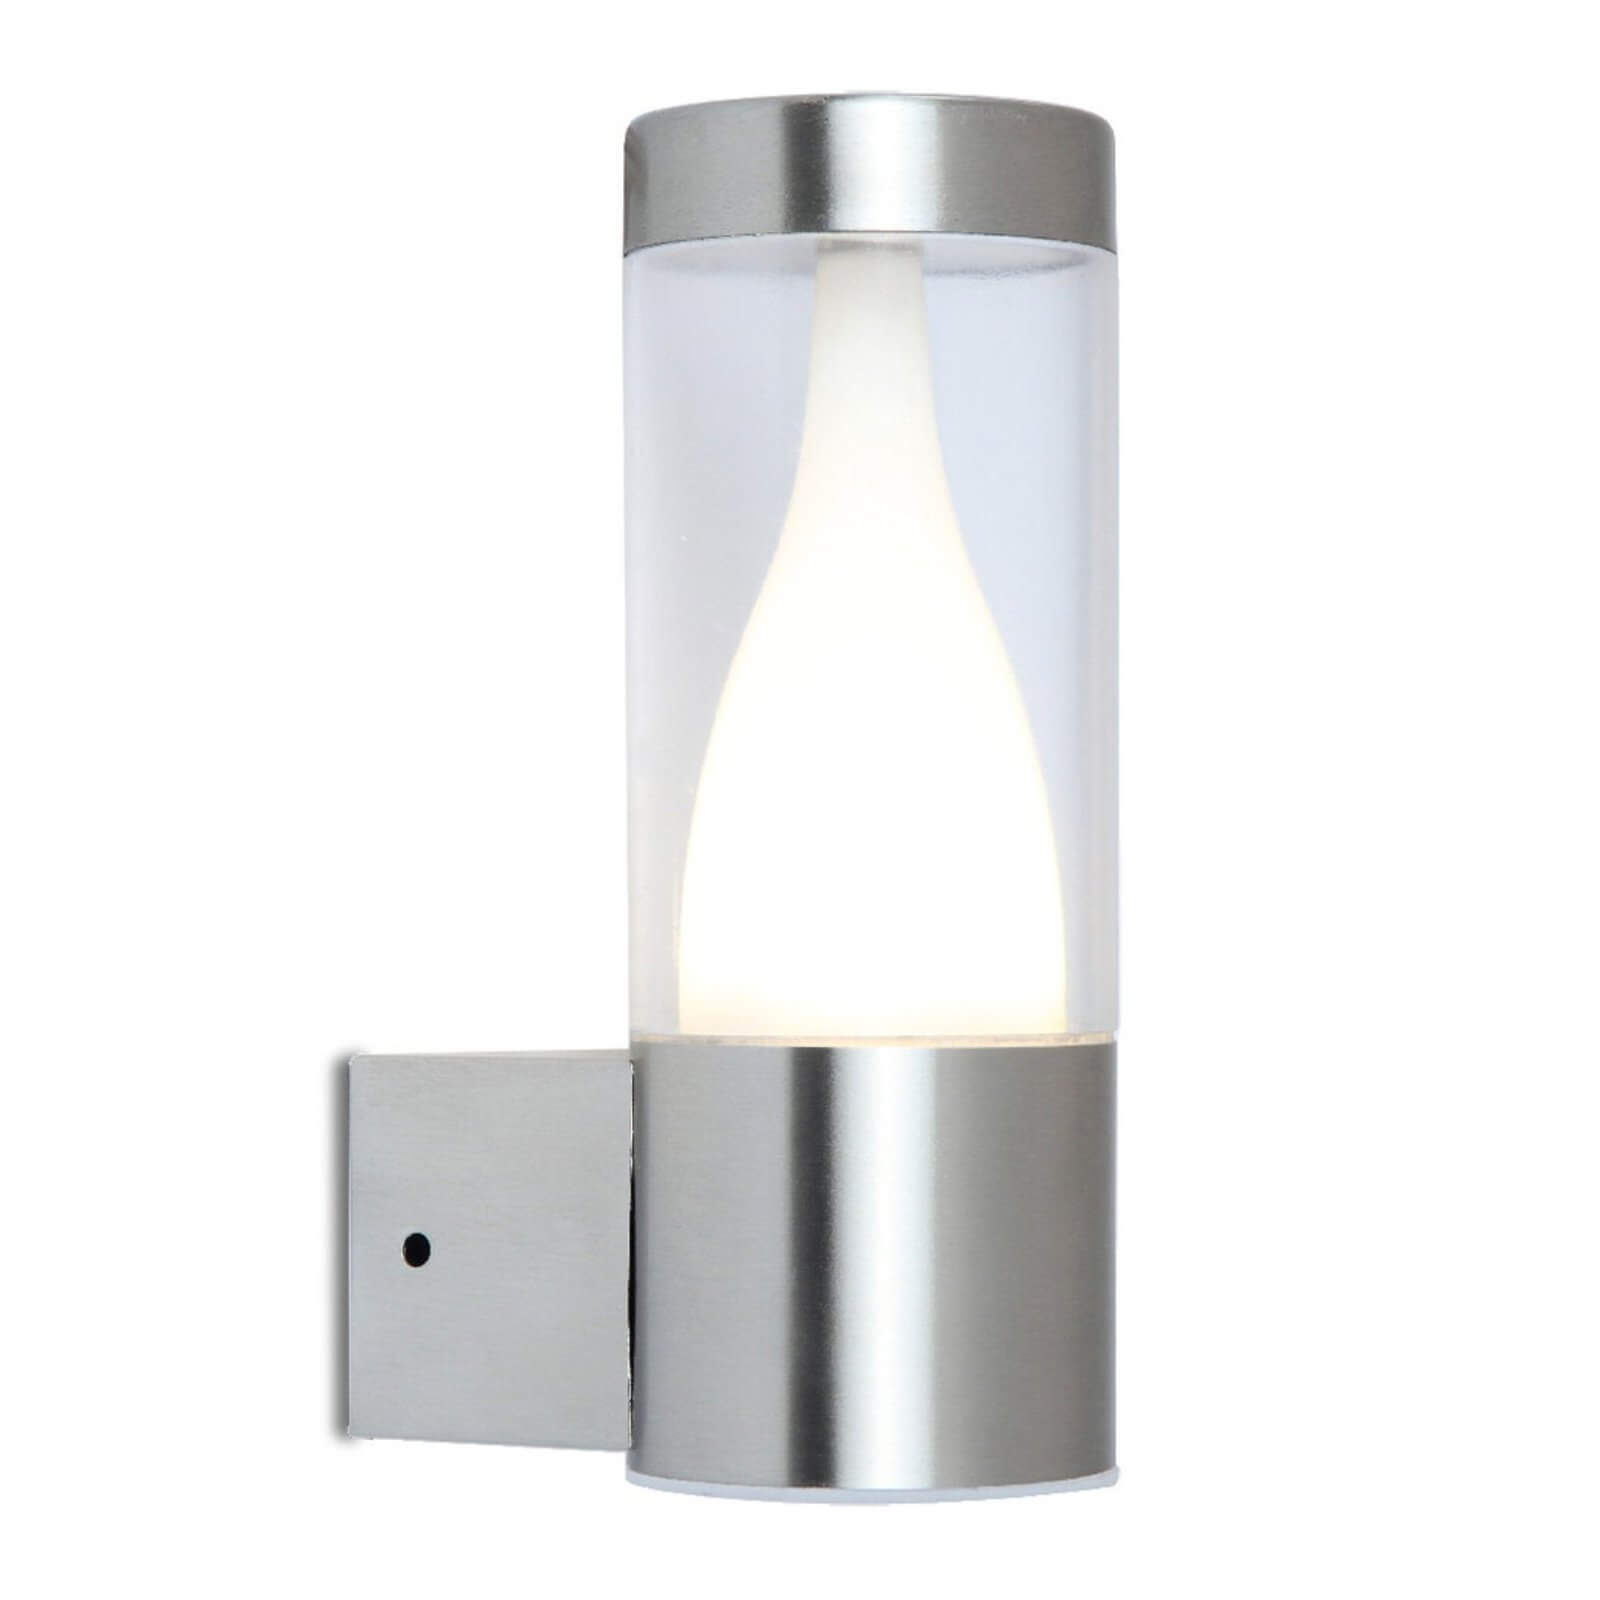 Lutec Virgo LED Stainless Steel Outdoor Wall Light